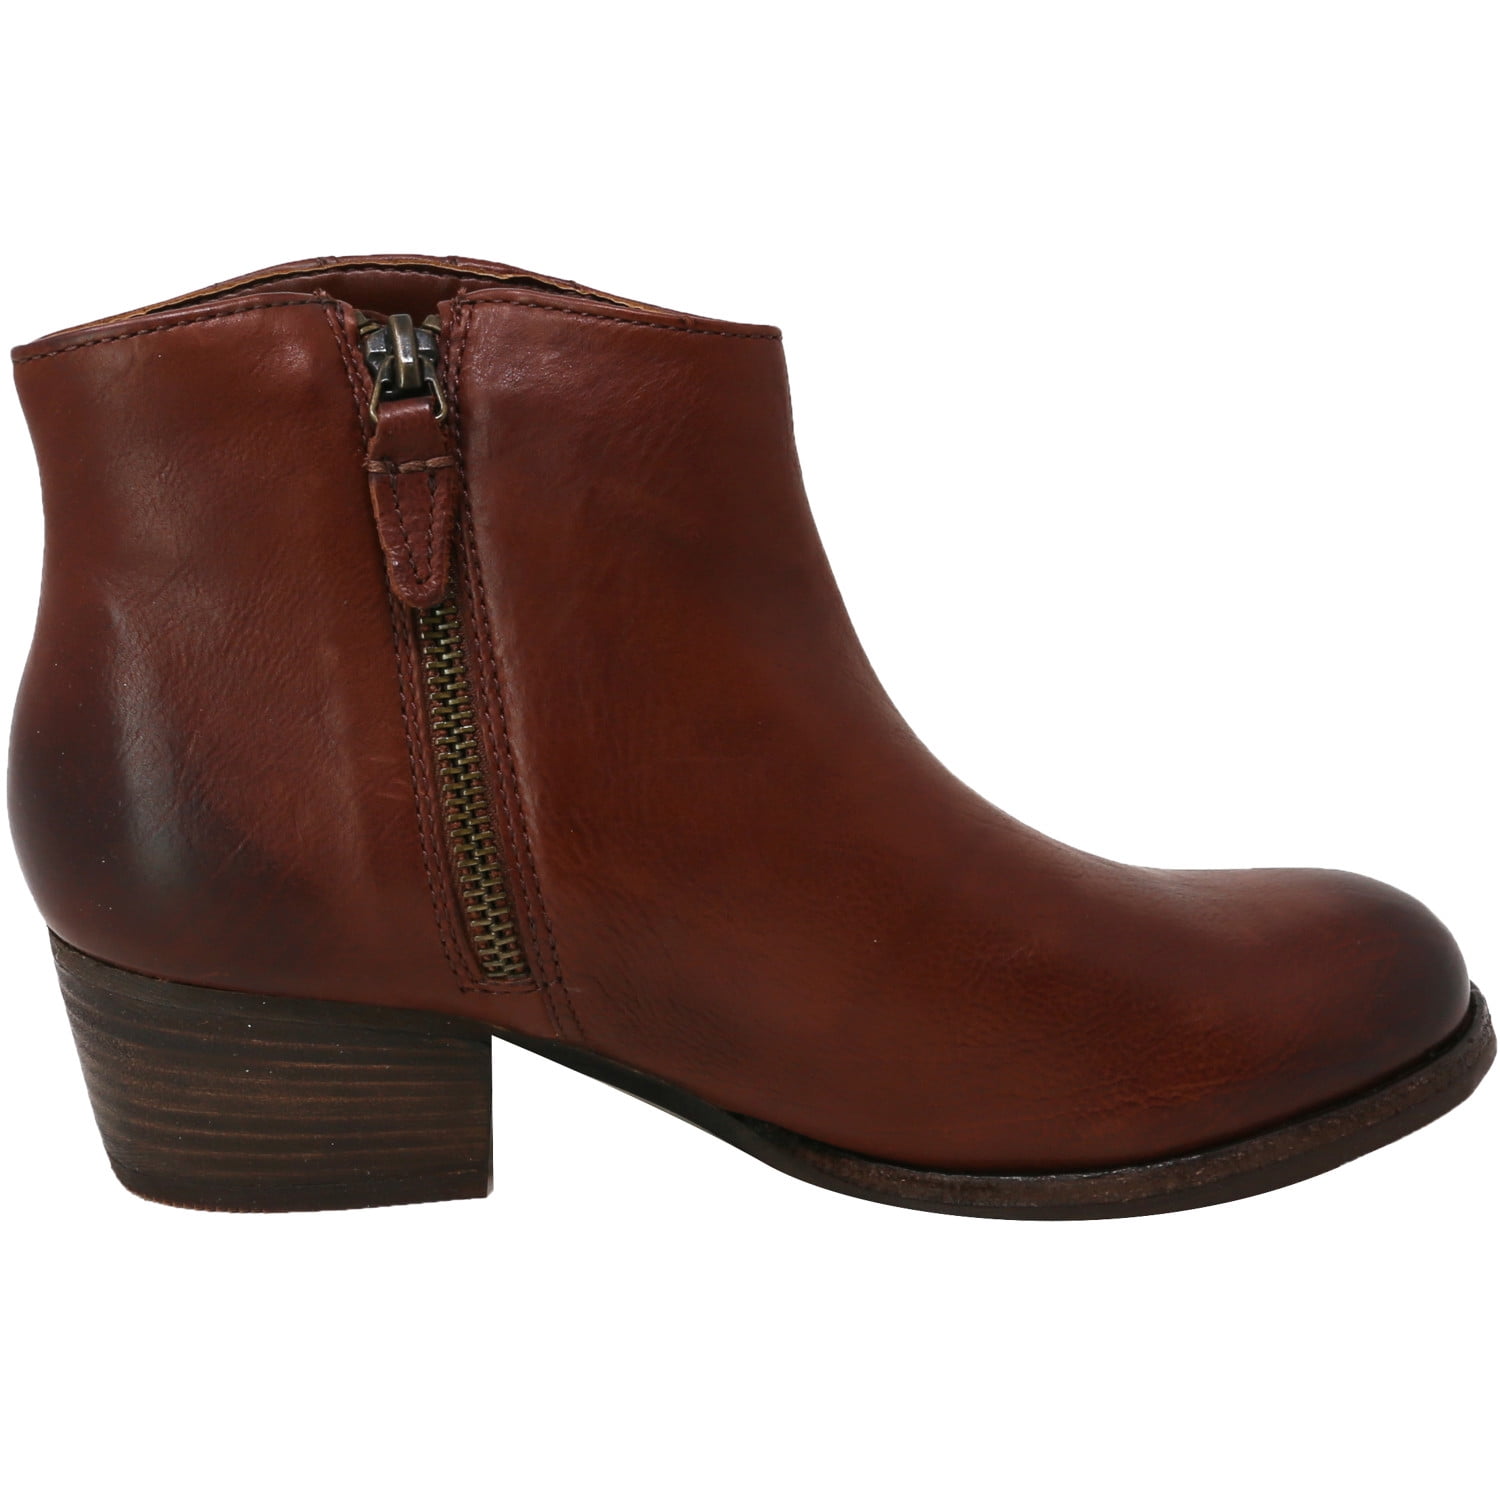 clarks maypearl fawn boots